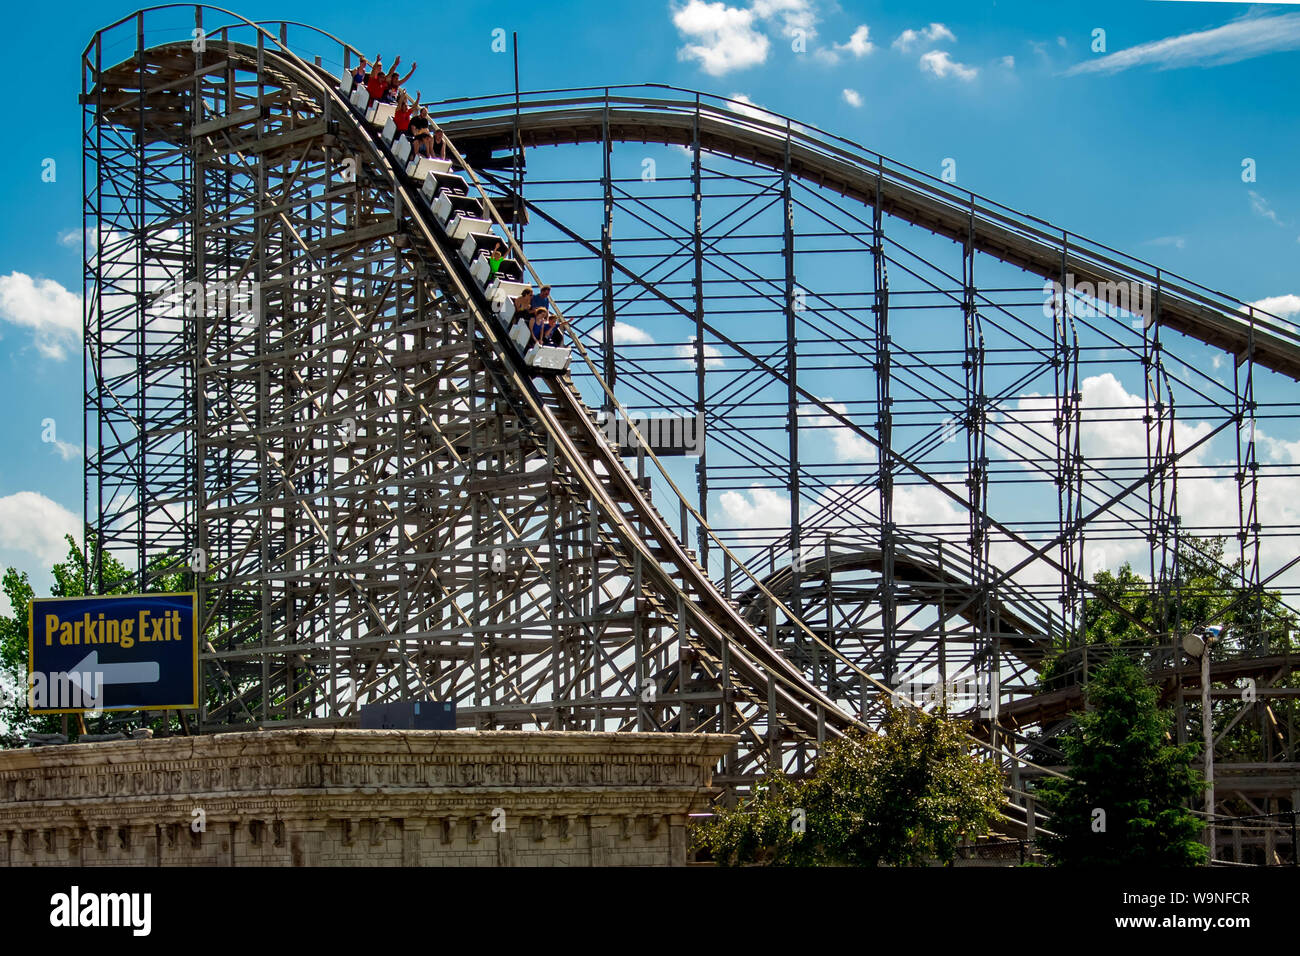 Roller Coaster In Mt.Olympus Resort , Wisconsin Dells . WI USA 06/17/18 Stock Photo